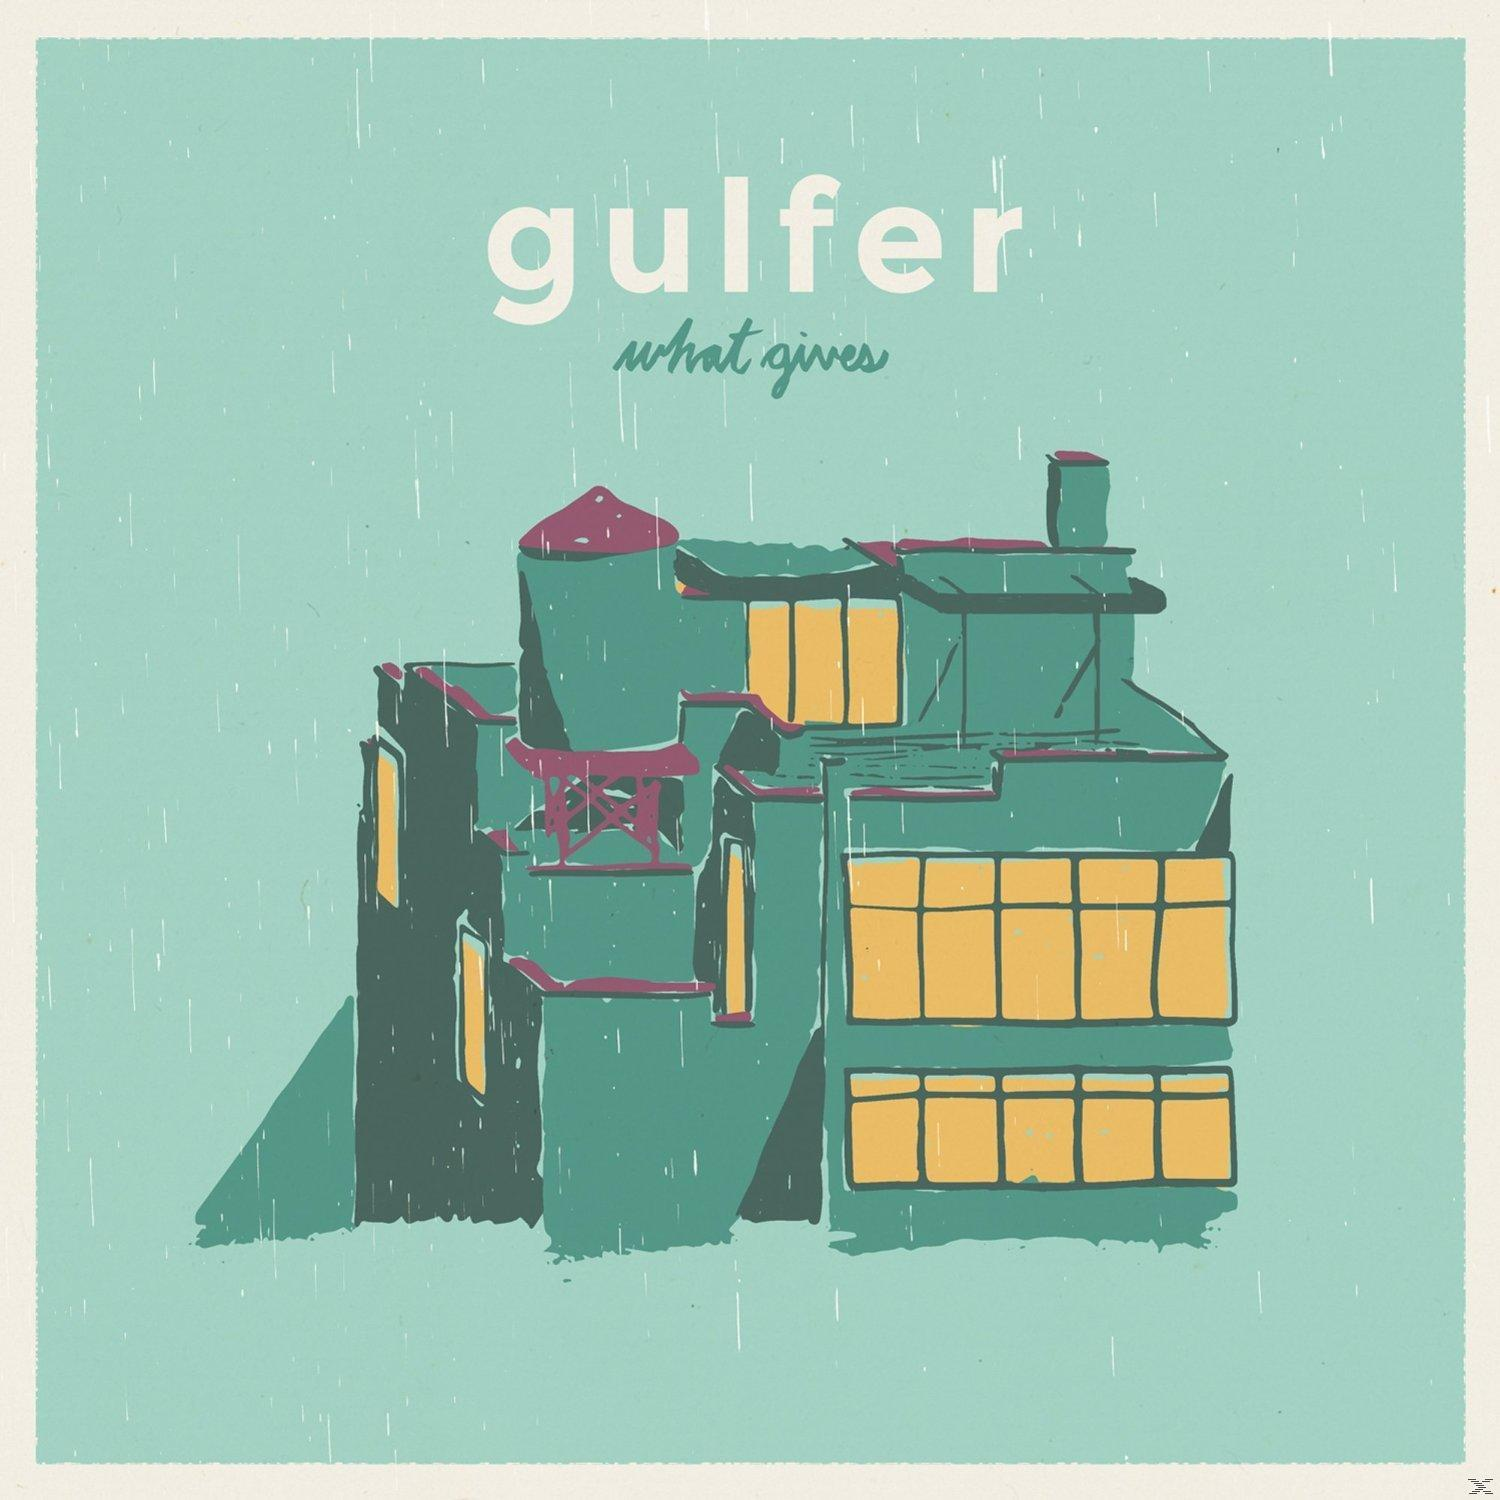 - - Gives Gulfer What (Vinyl) (EP)